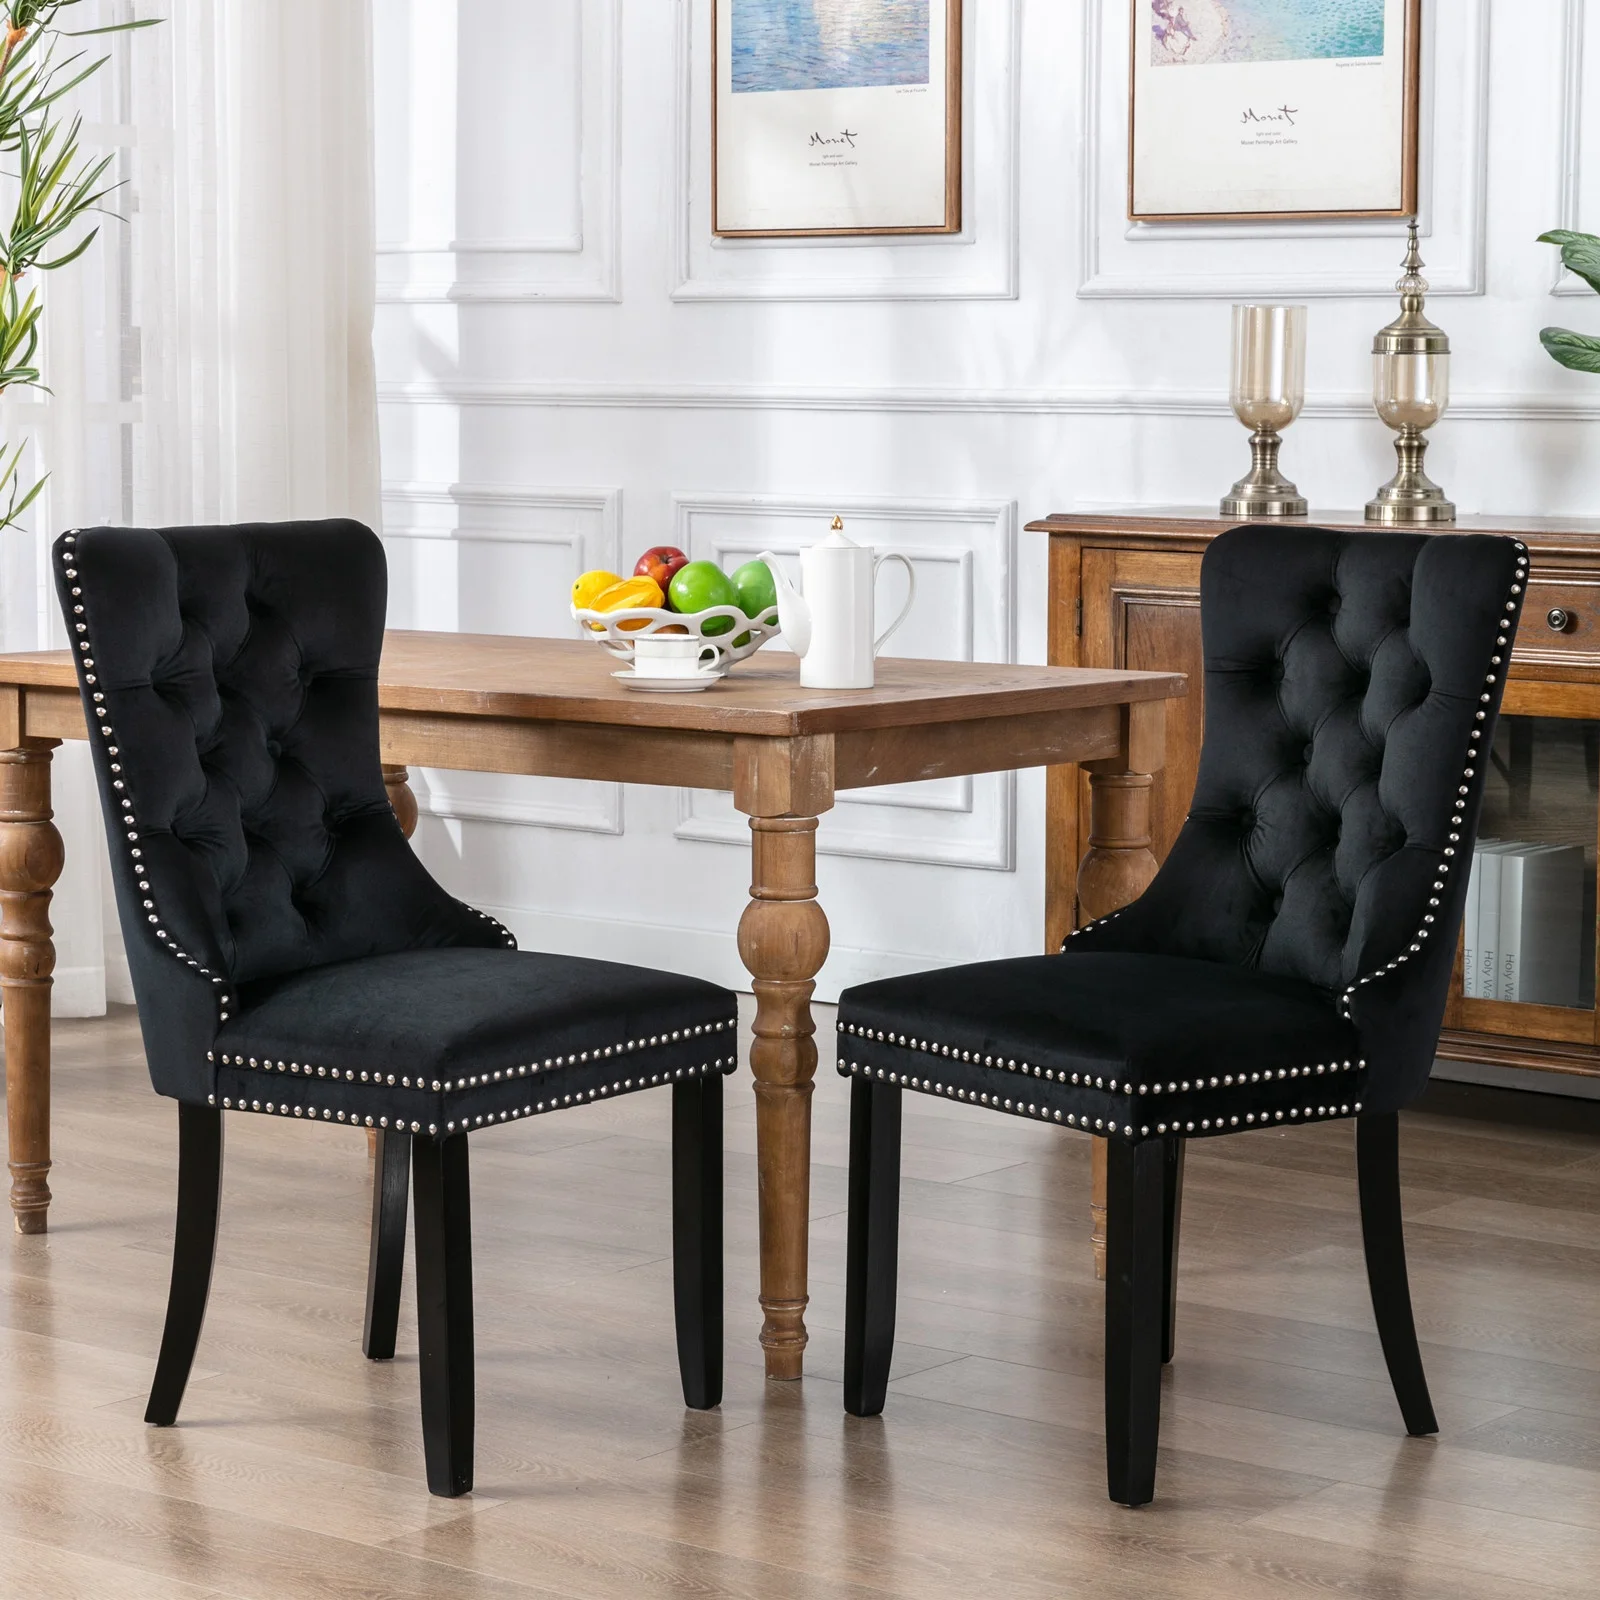 

2pcs Furniture High-end Tufted Solid Wood Contemporary Velvet Upholstered Dining Chair with Wood Legs Nailhead Trim Black